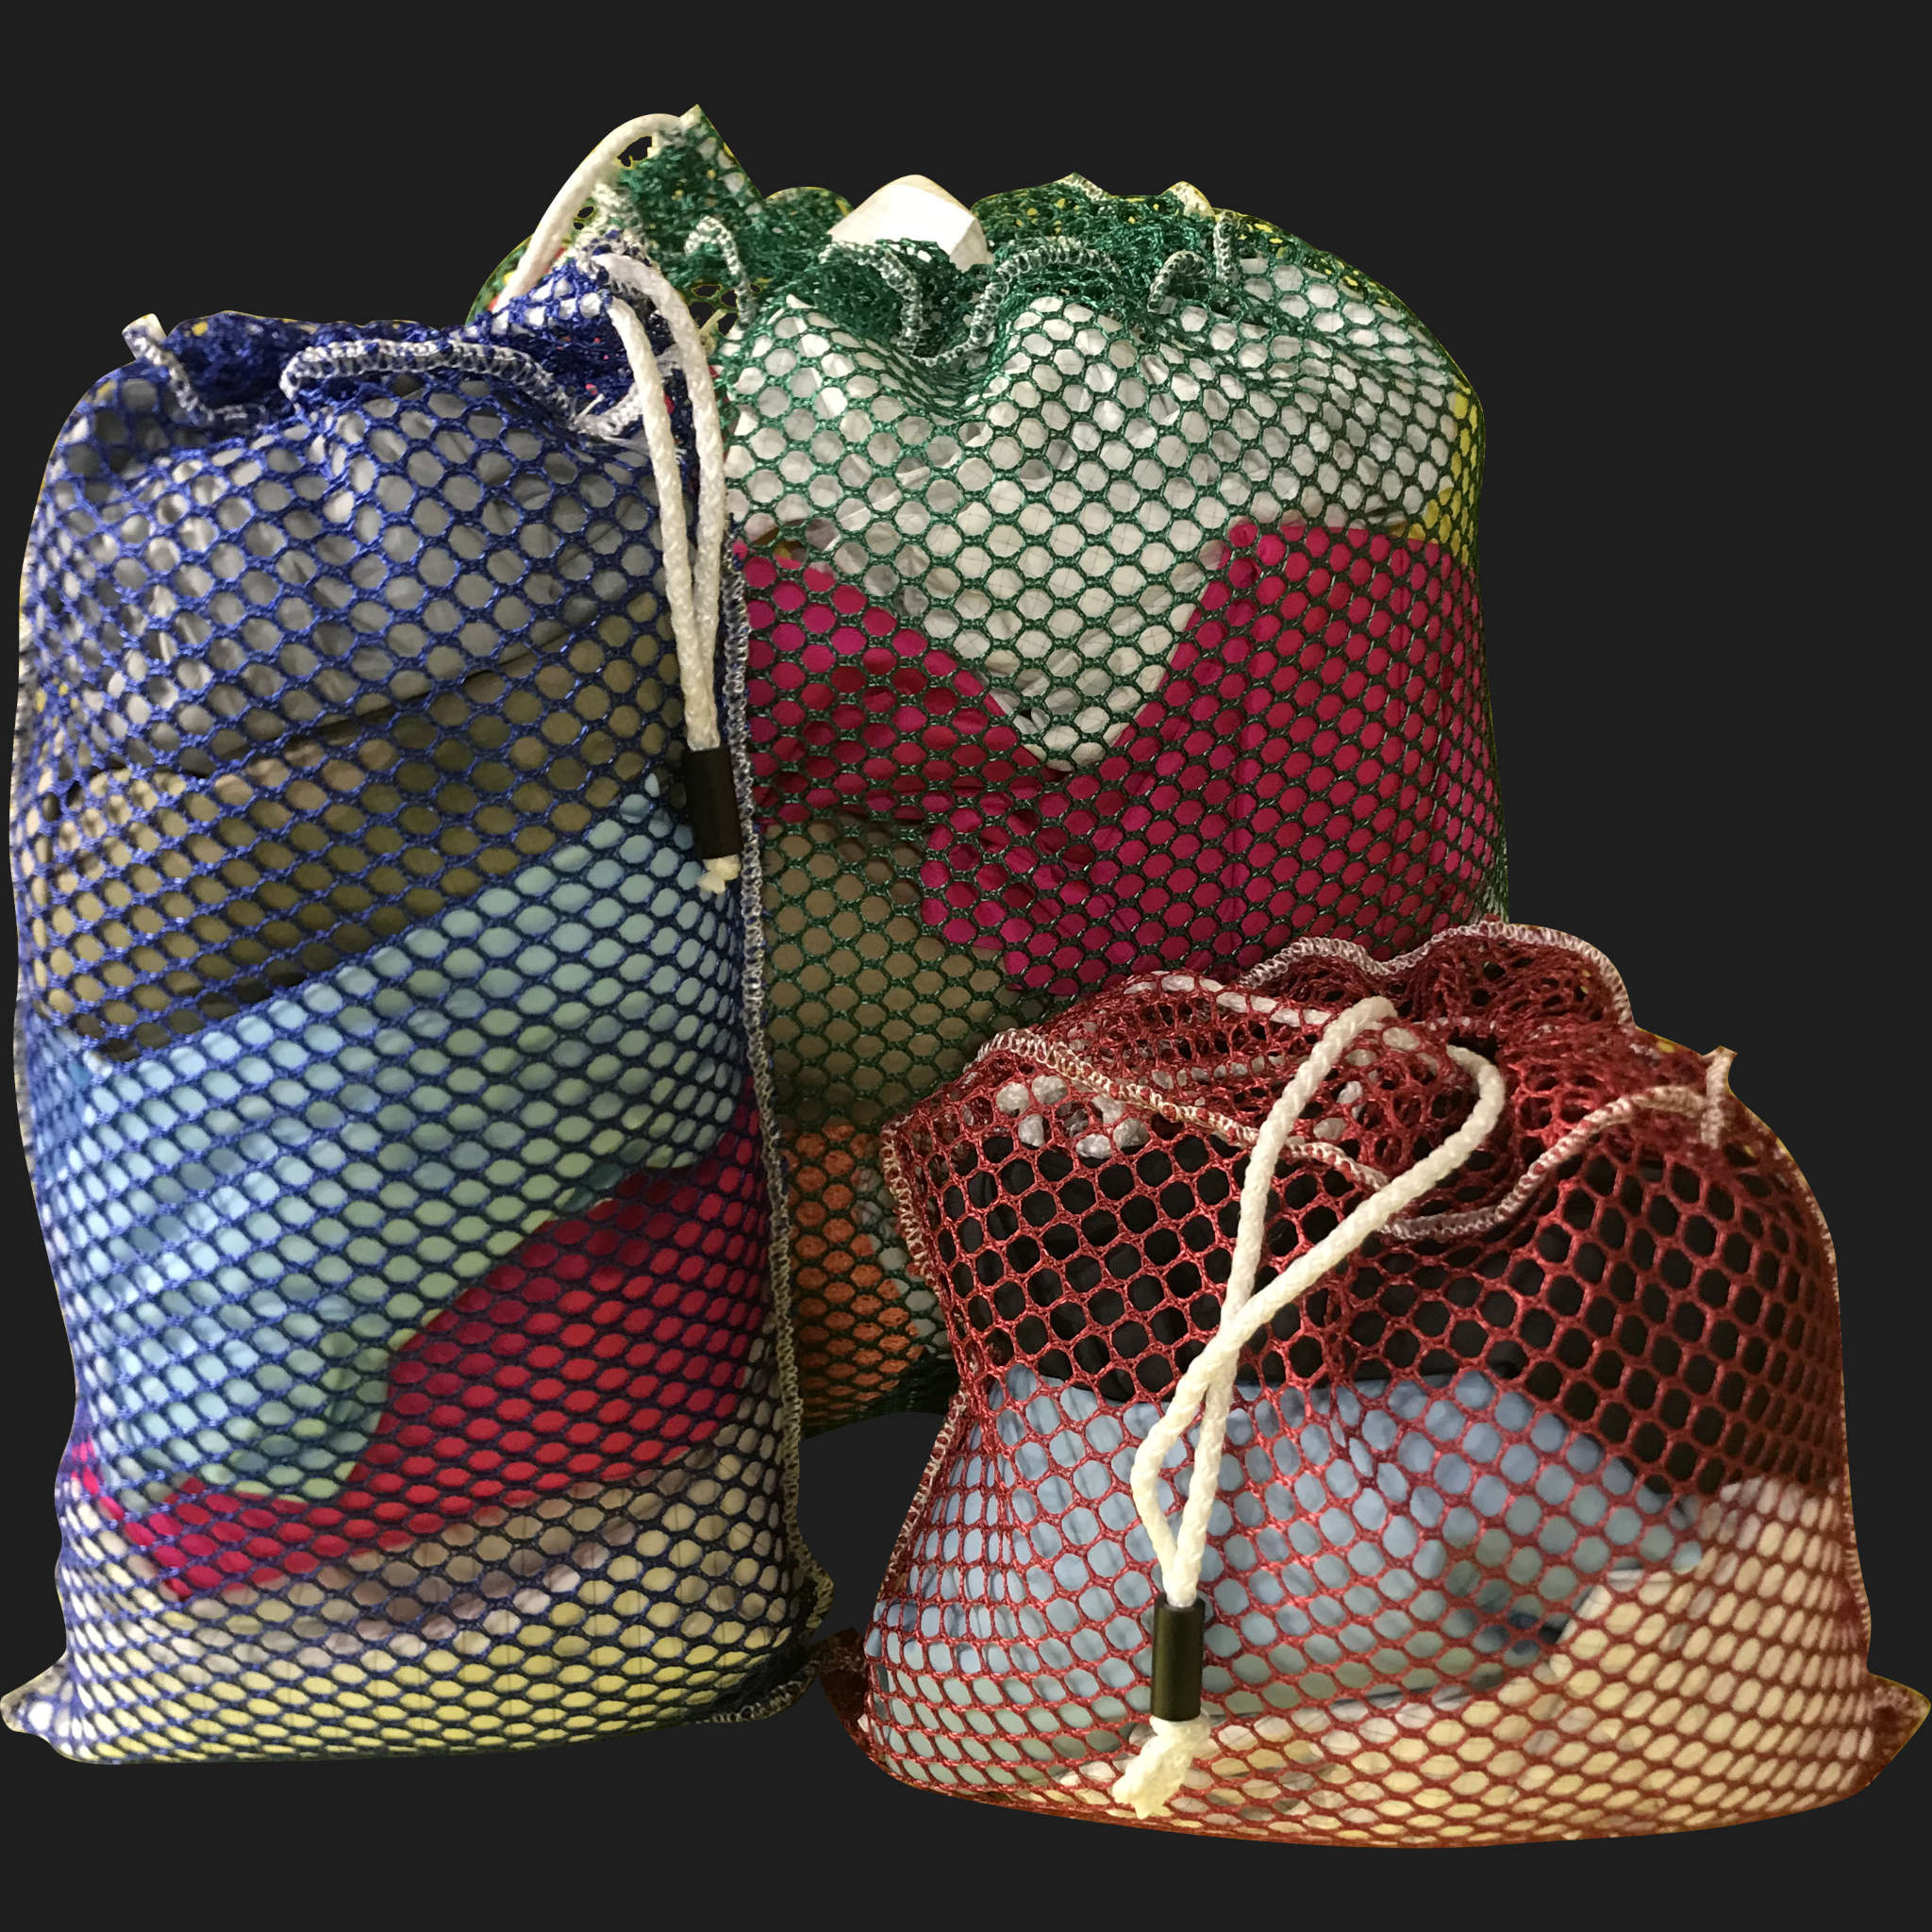 14" x 36" Customized Mesh-Net-Laundry Bags Heavy Duty with Cord and barrellock closure